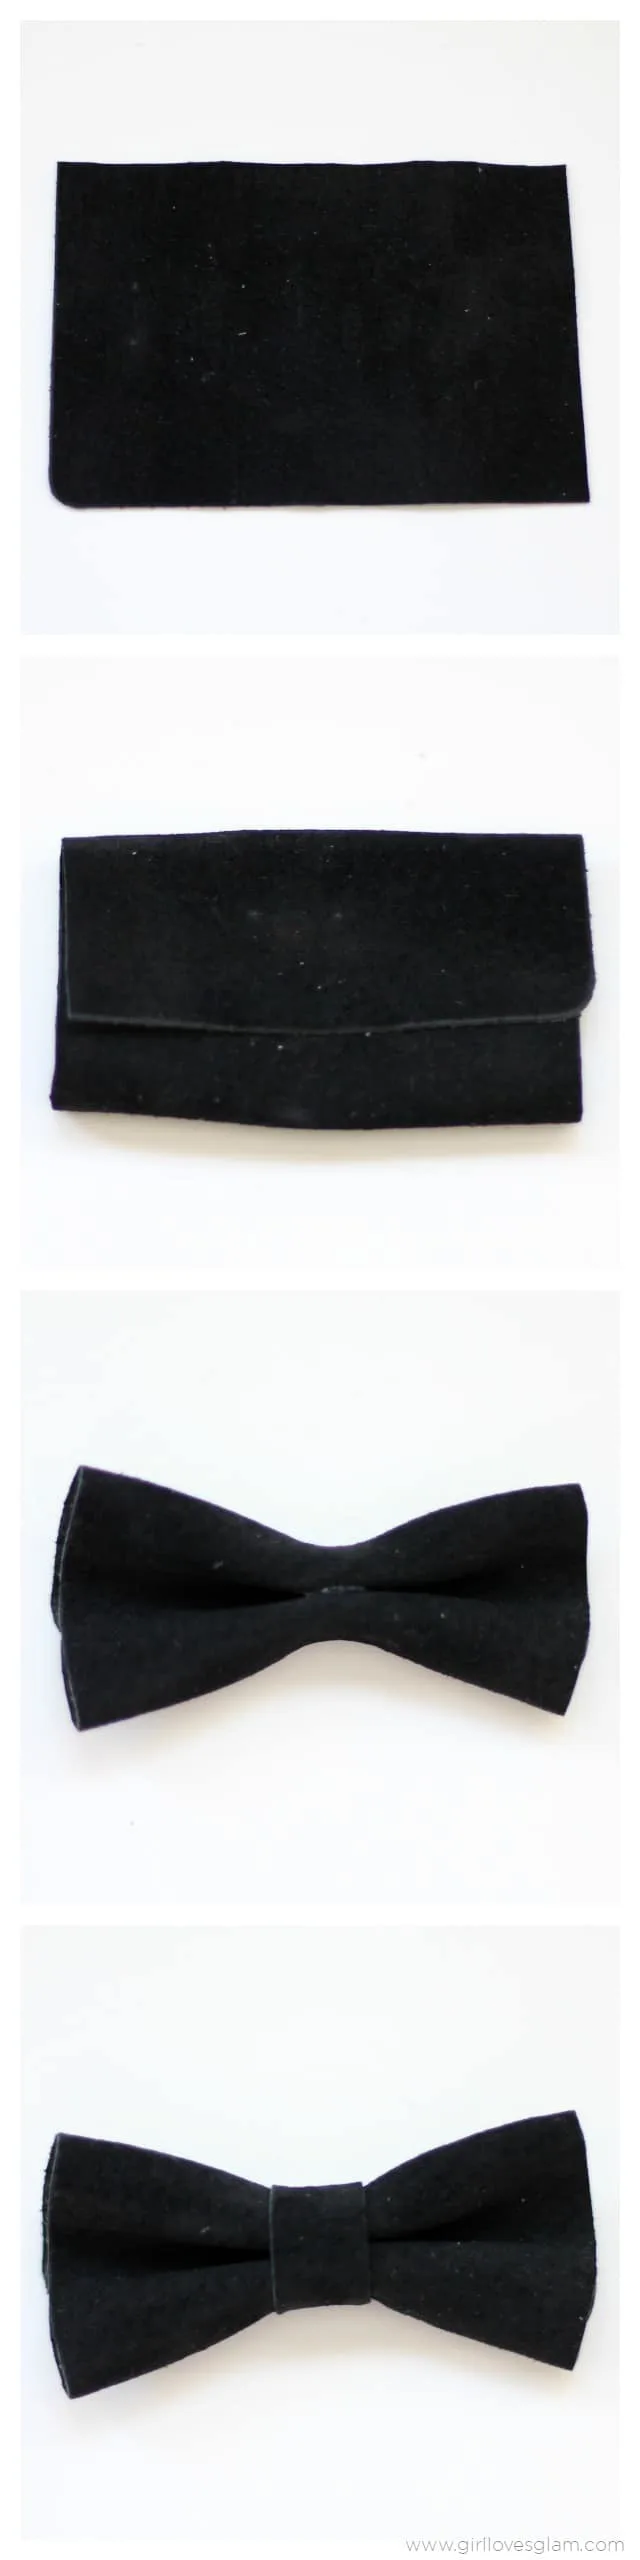 How to make a leather bow on www.girllovesglam.com